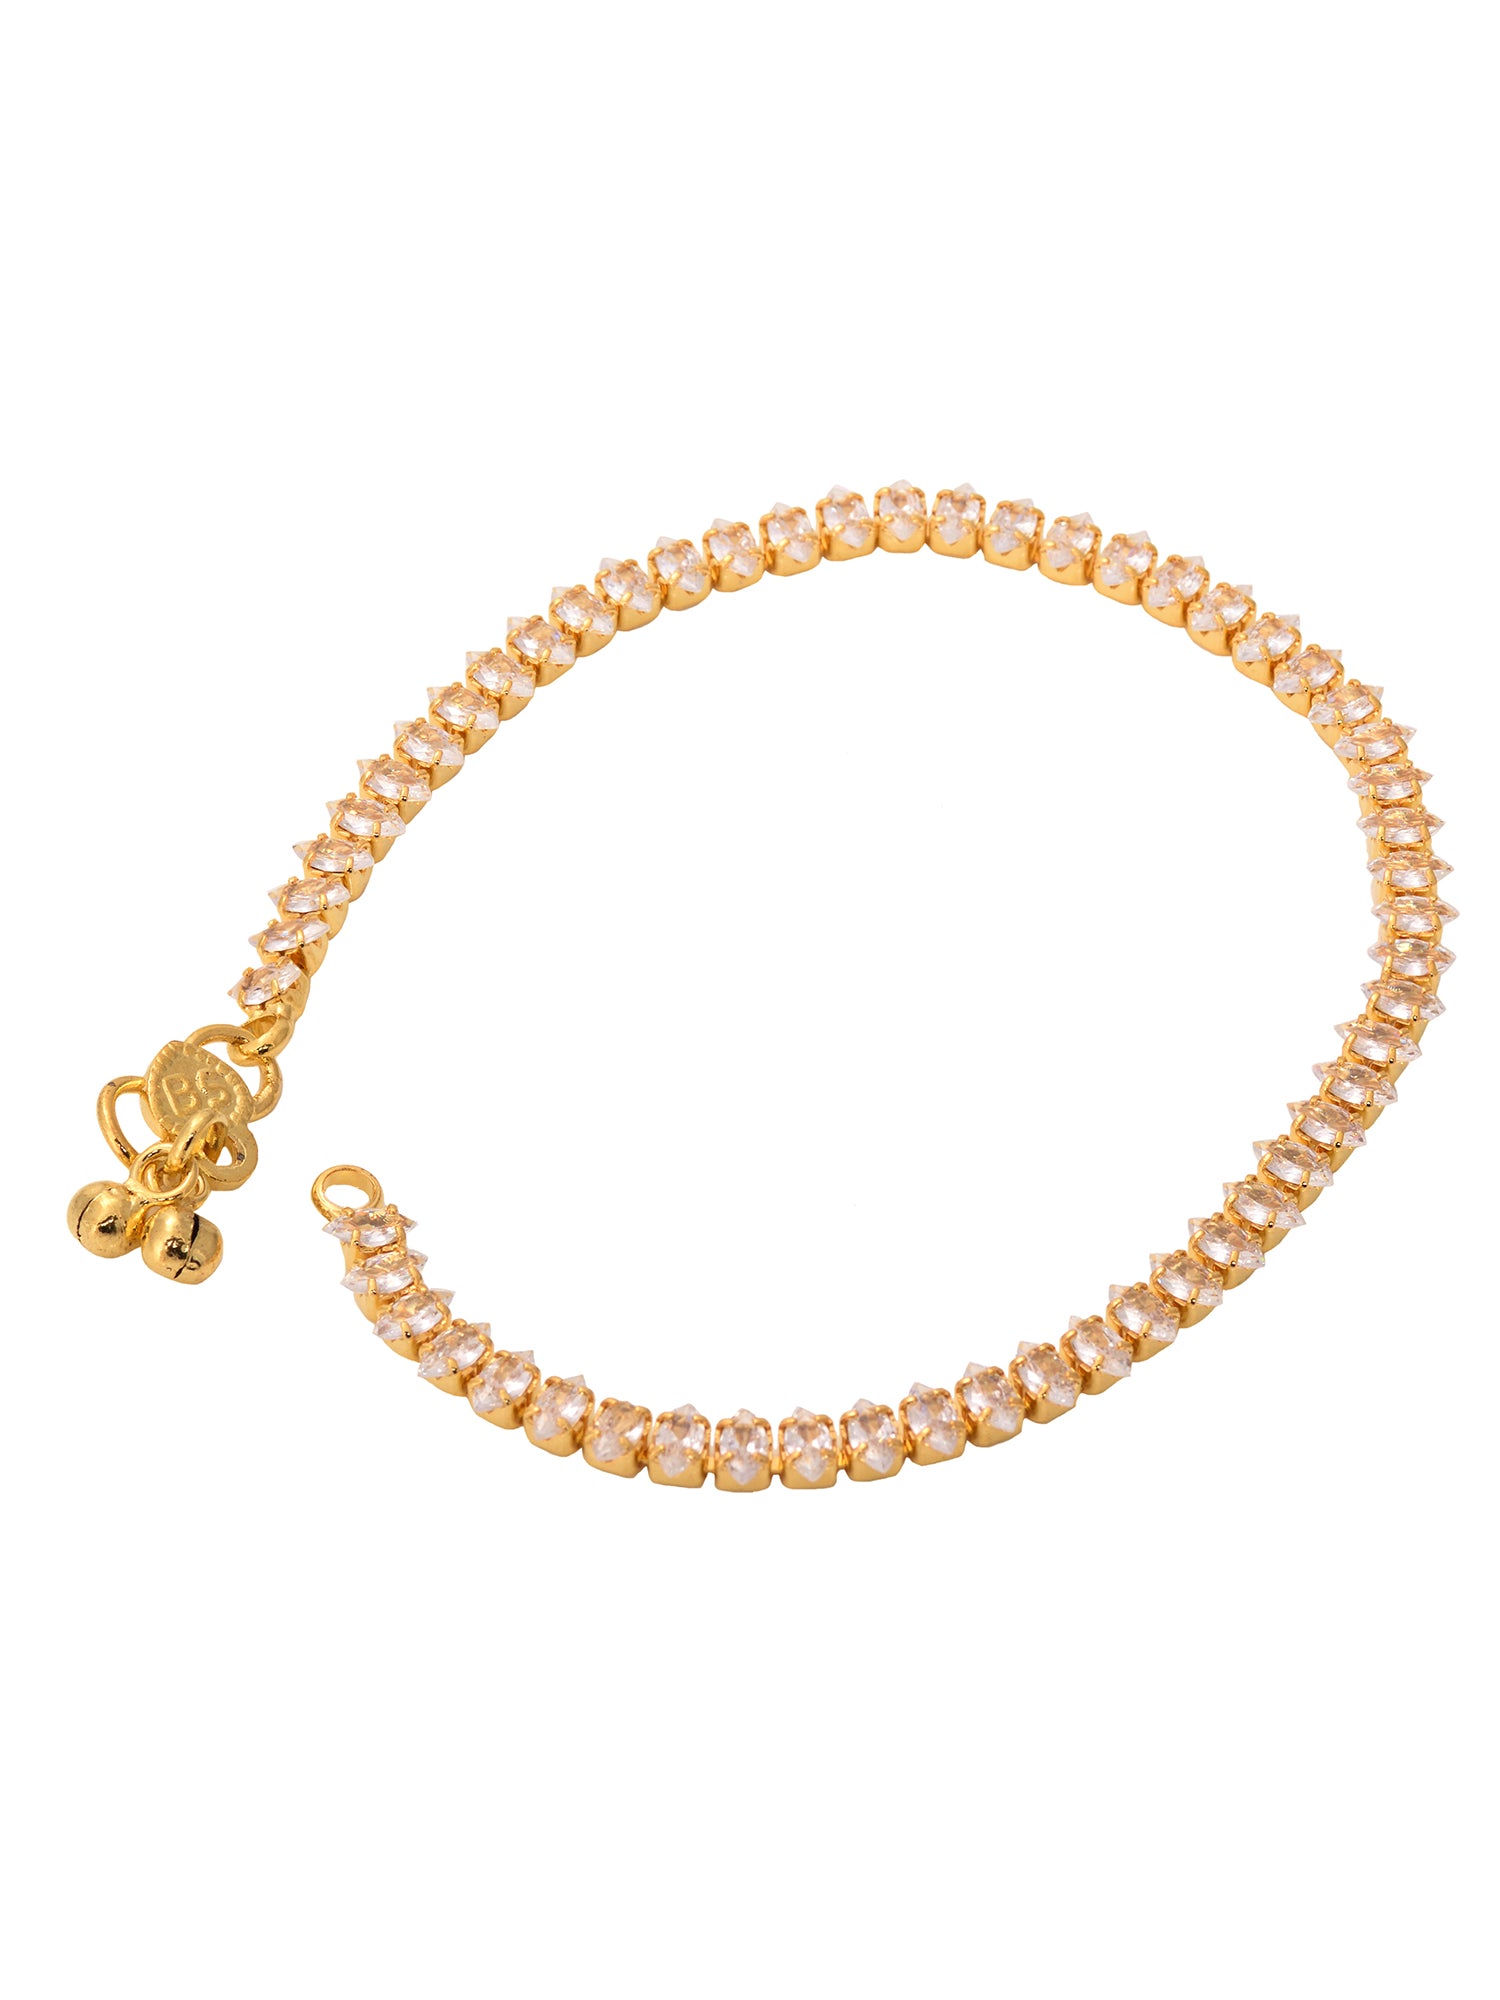 Set Of 2 Gold Plated White AD Studded Modern Payal Anklet, zaveri pearls, sale price rs, sale price, sale gold plated, sale gold, sale, rubans, ring, regular price, priyassi jewellery, kushal